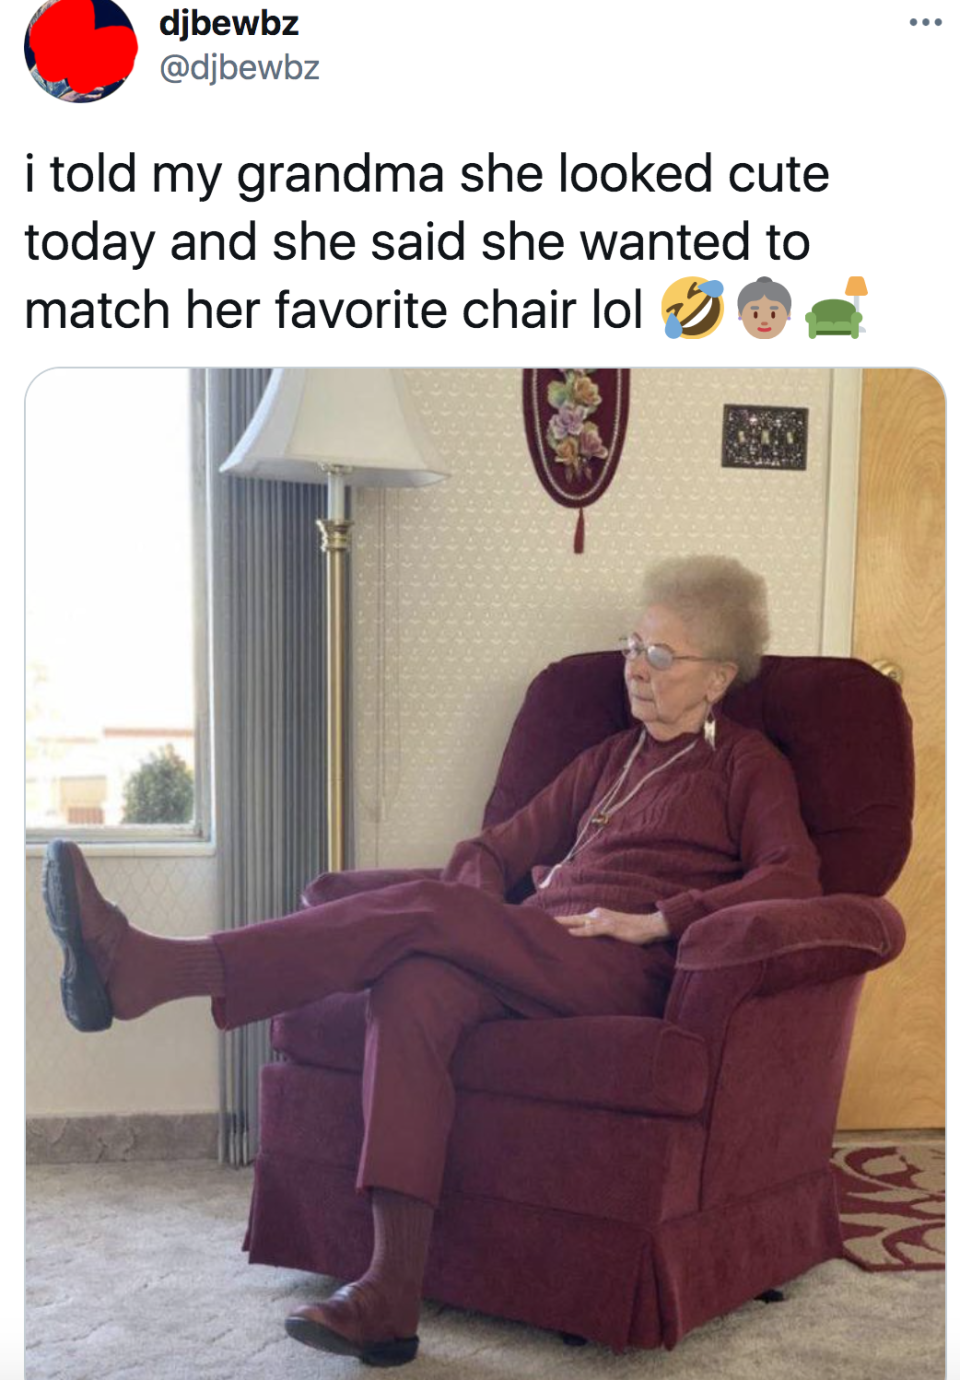 tweet of a grandma who wanted to match her couch so she wore a similar colored outfit